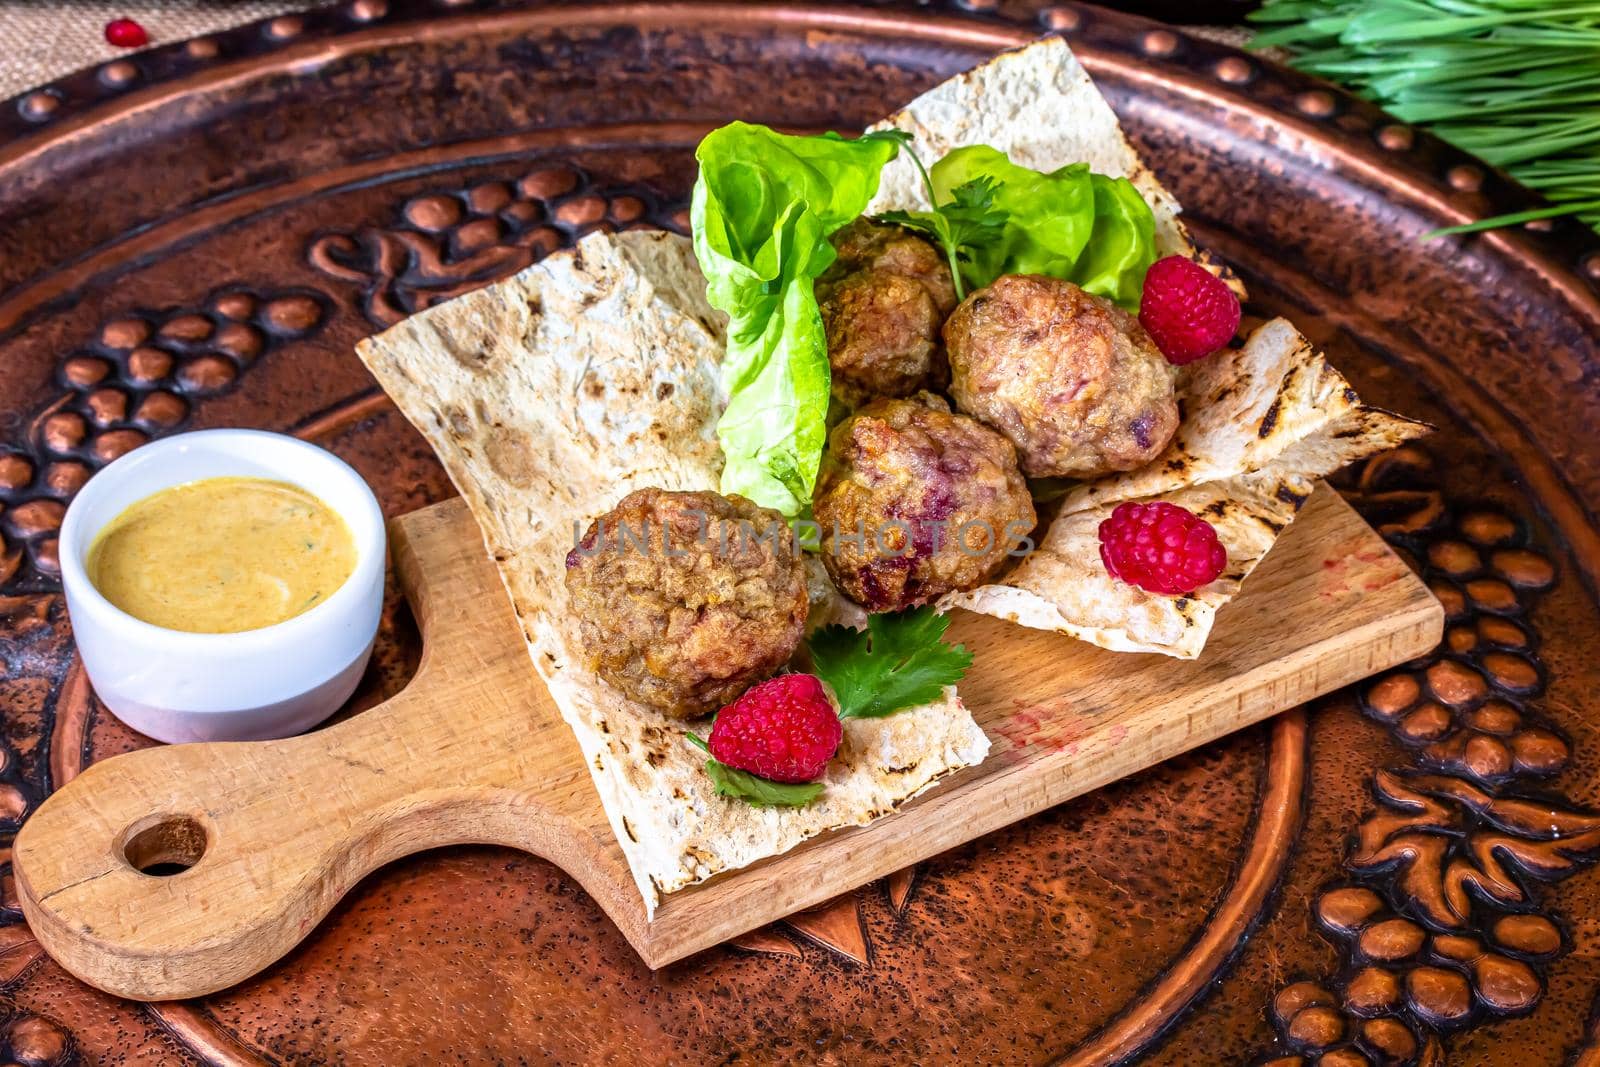 Grilled meatballs on pita bread with sauce by Milanchikov